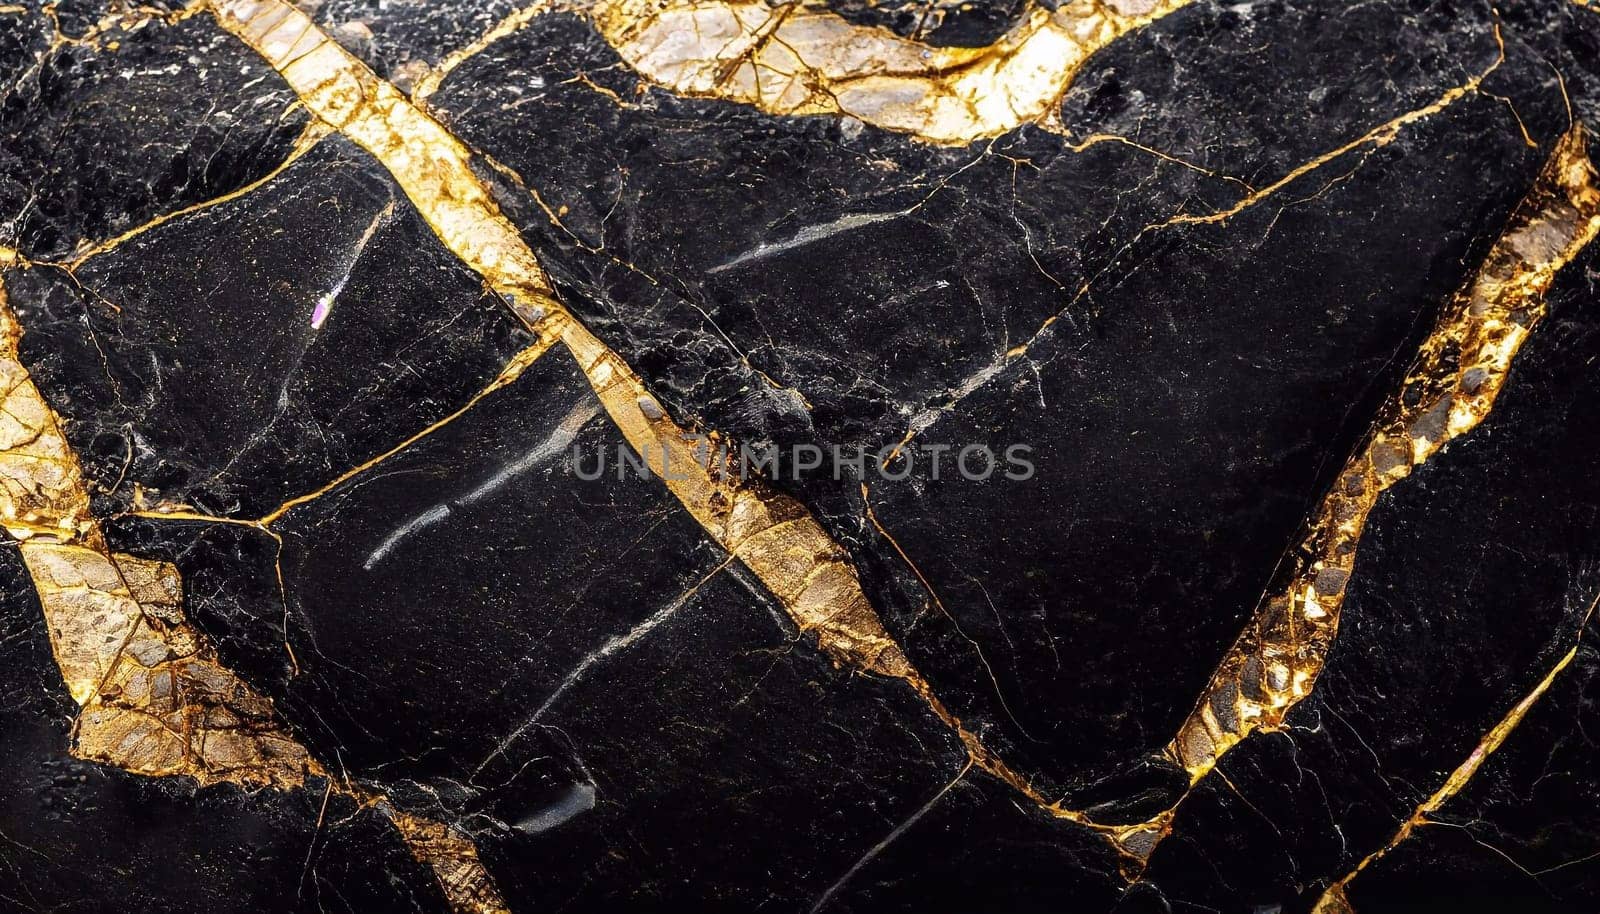 texture of glossy black glossy stone with gold veins by dec925